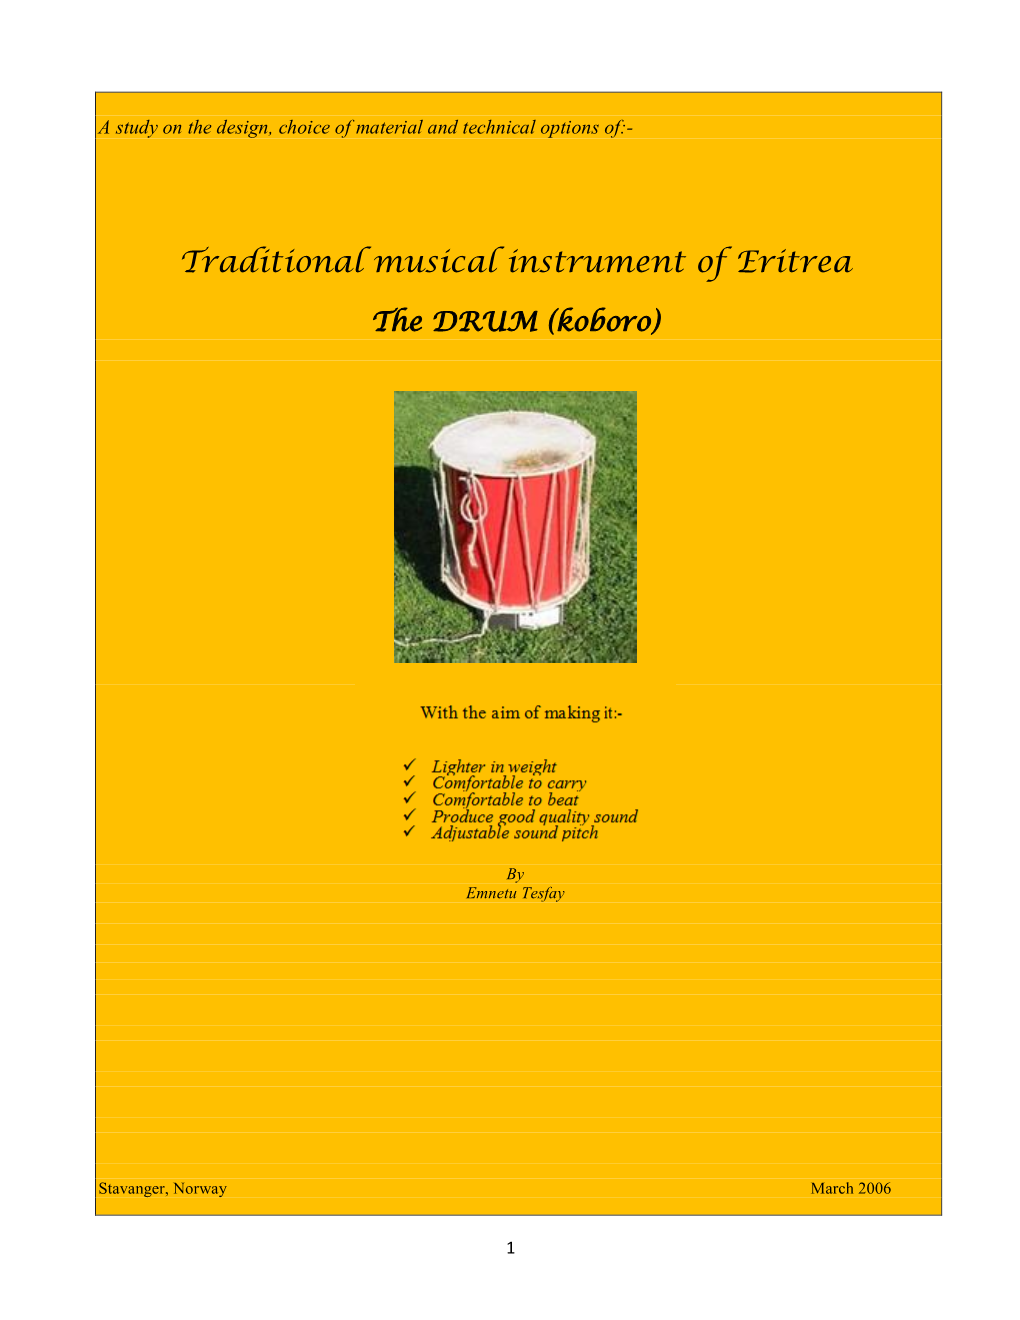 Traditional Musical Instrument of Eritrea